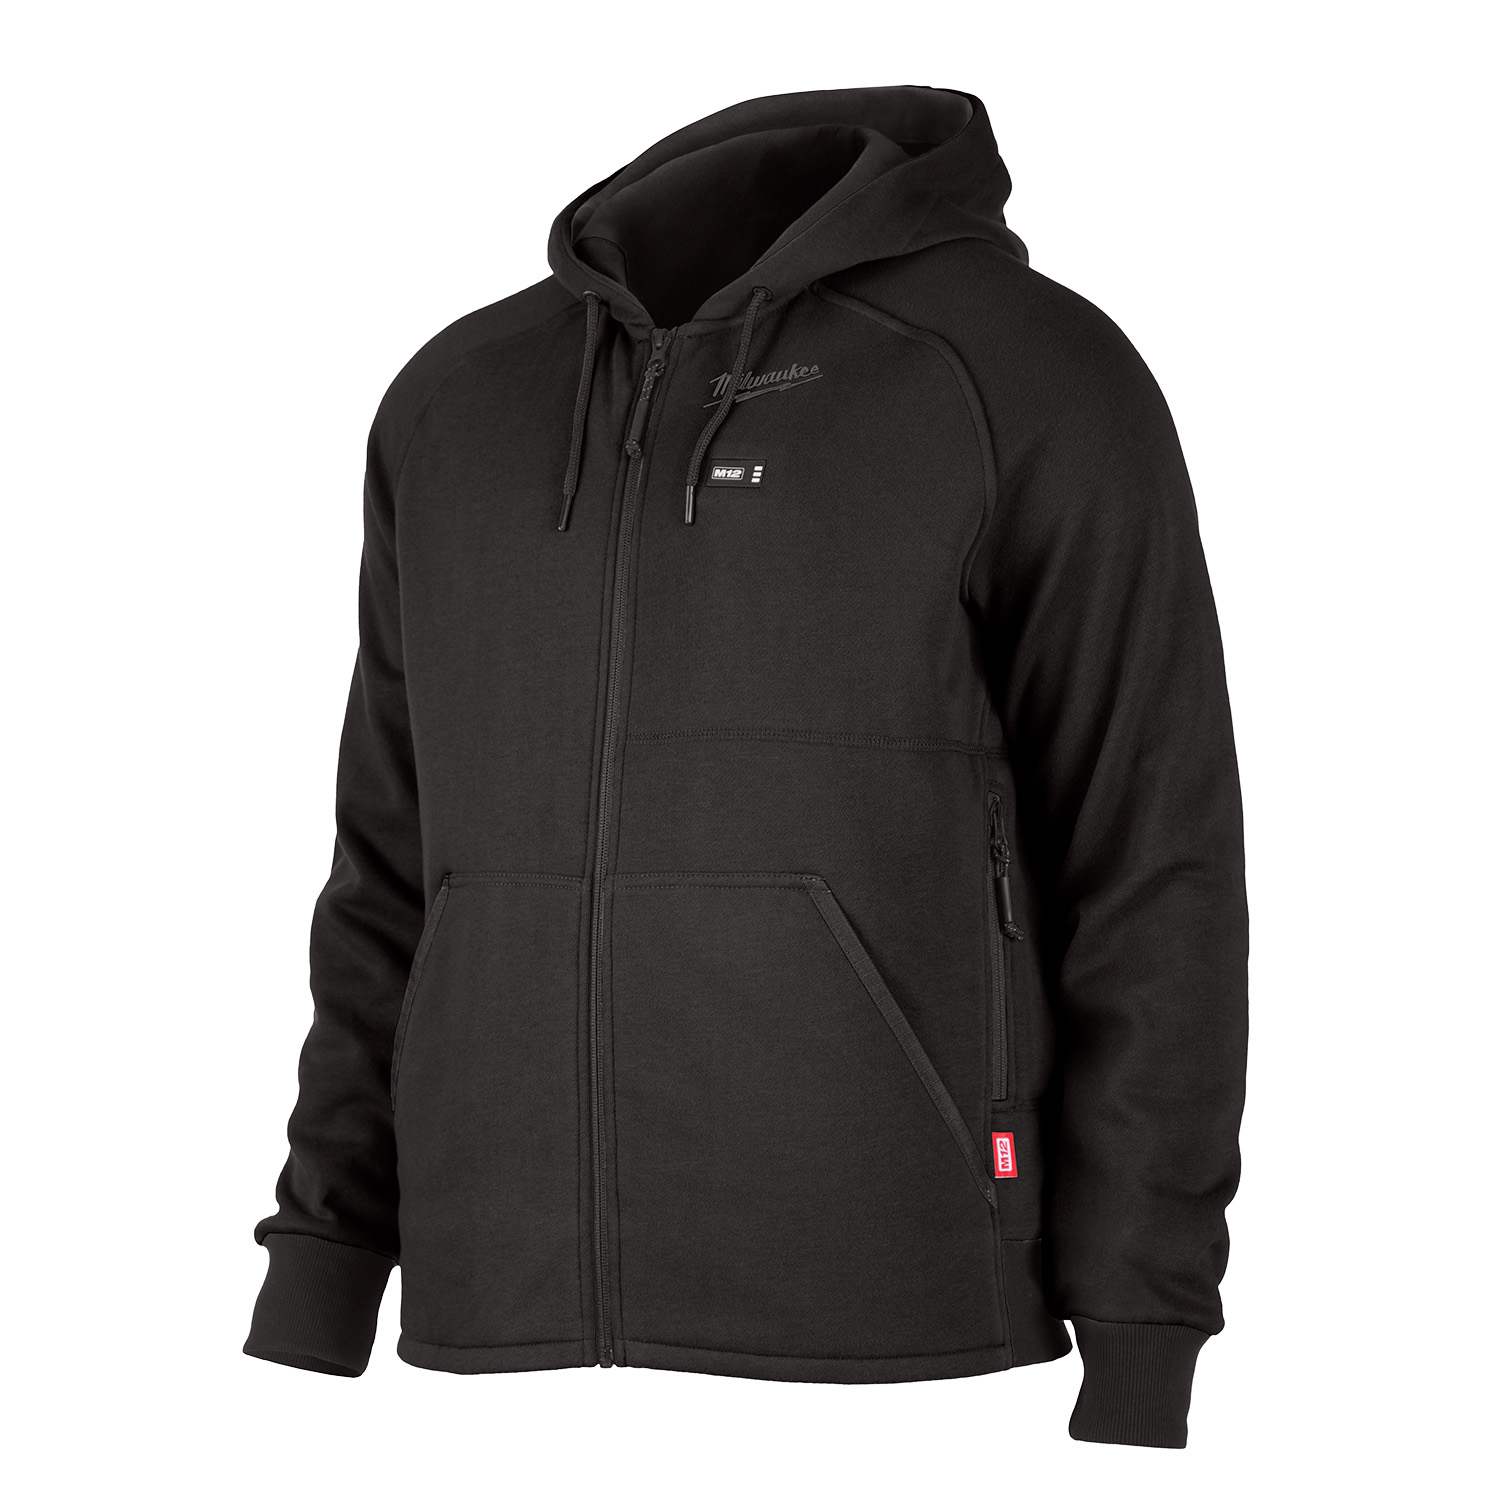 Milwaukee M12 Heated Hoodie Kit from Columbia Safety